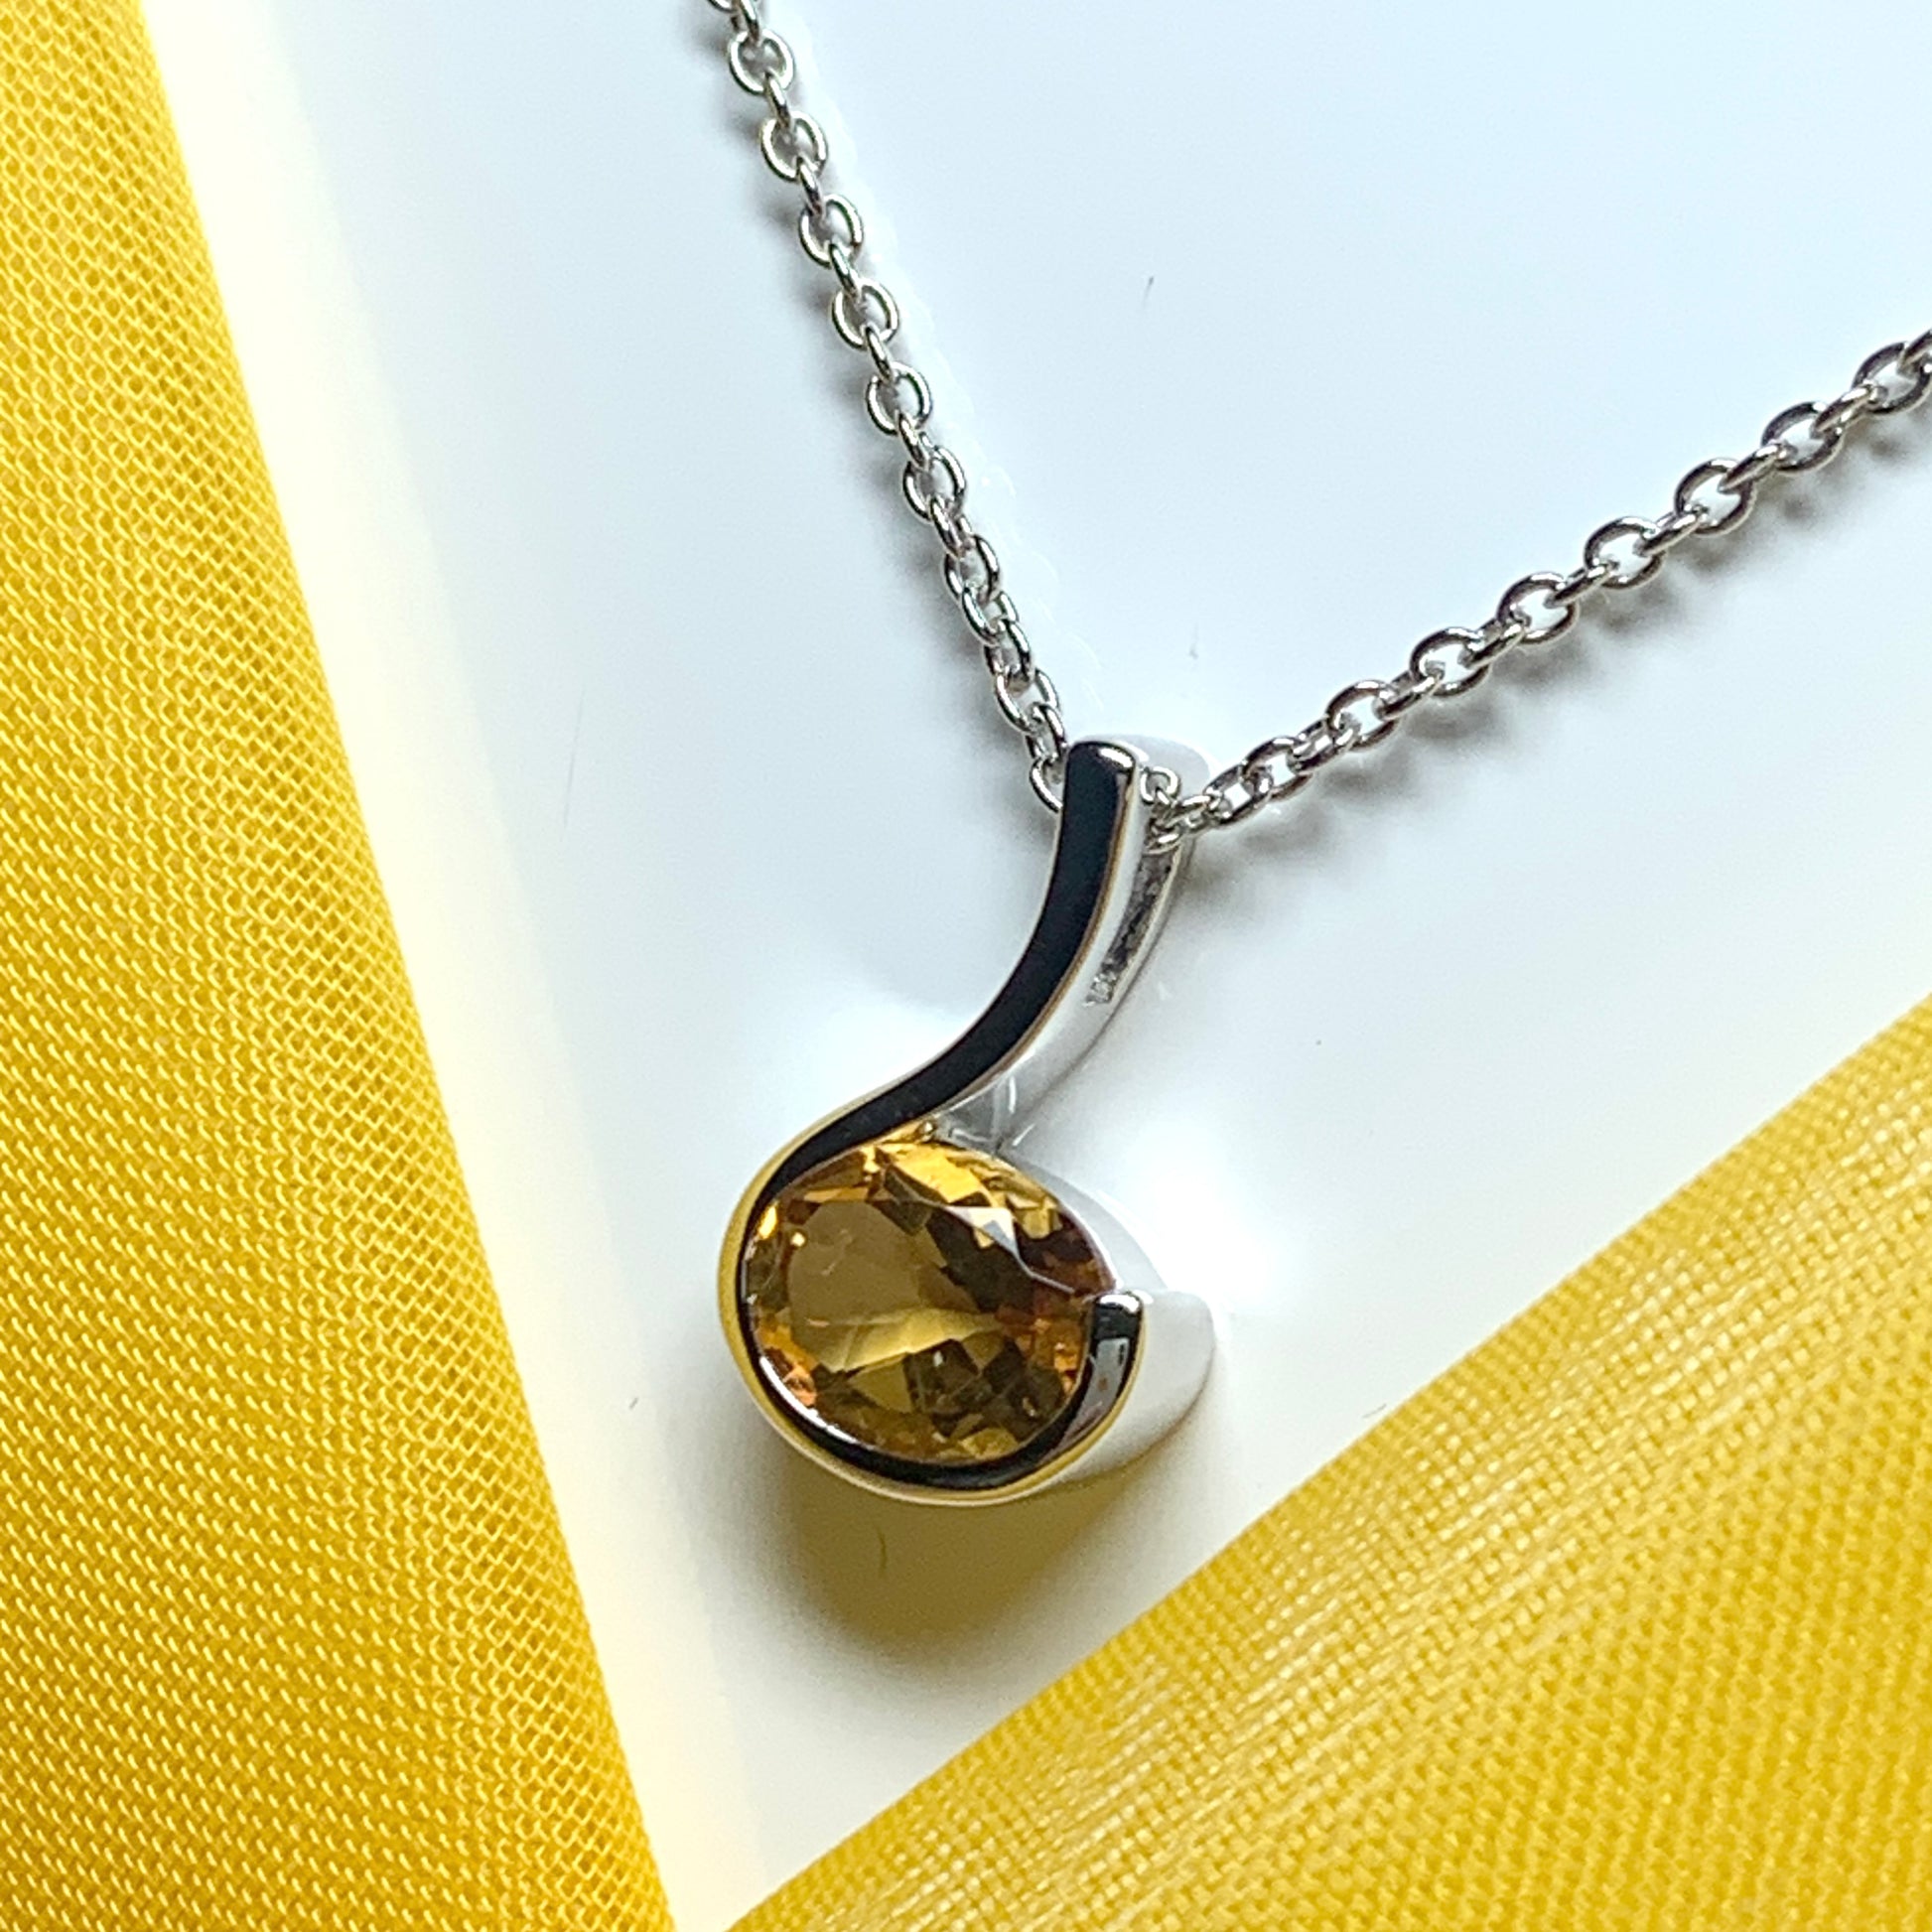 Real yellow citrine necklace oval fancy swirl sterling silver